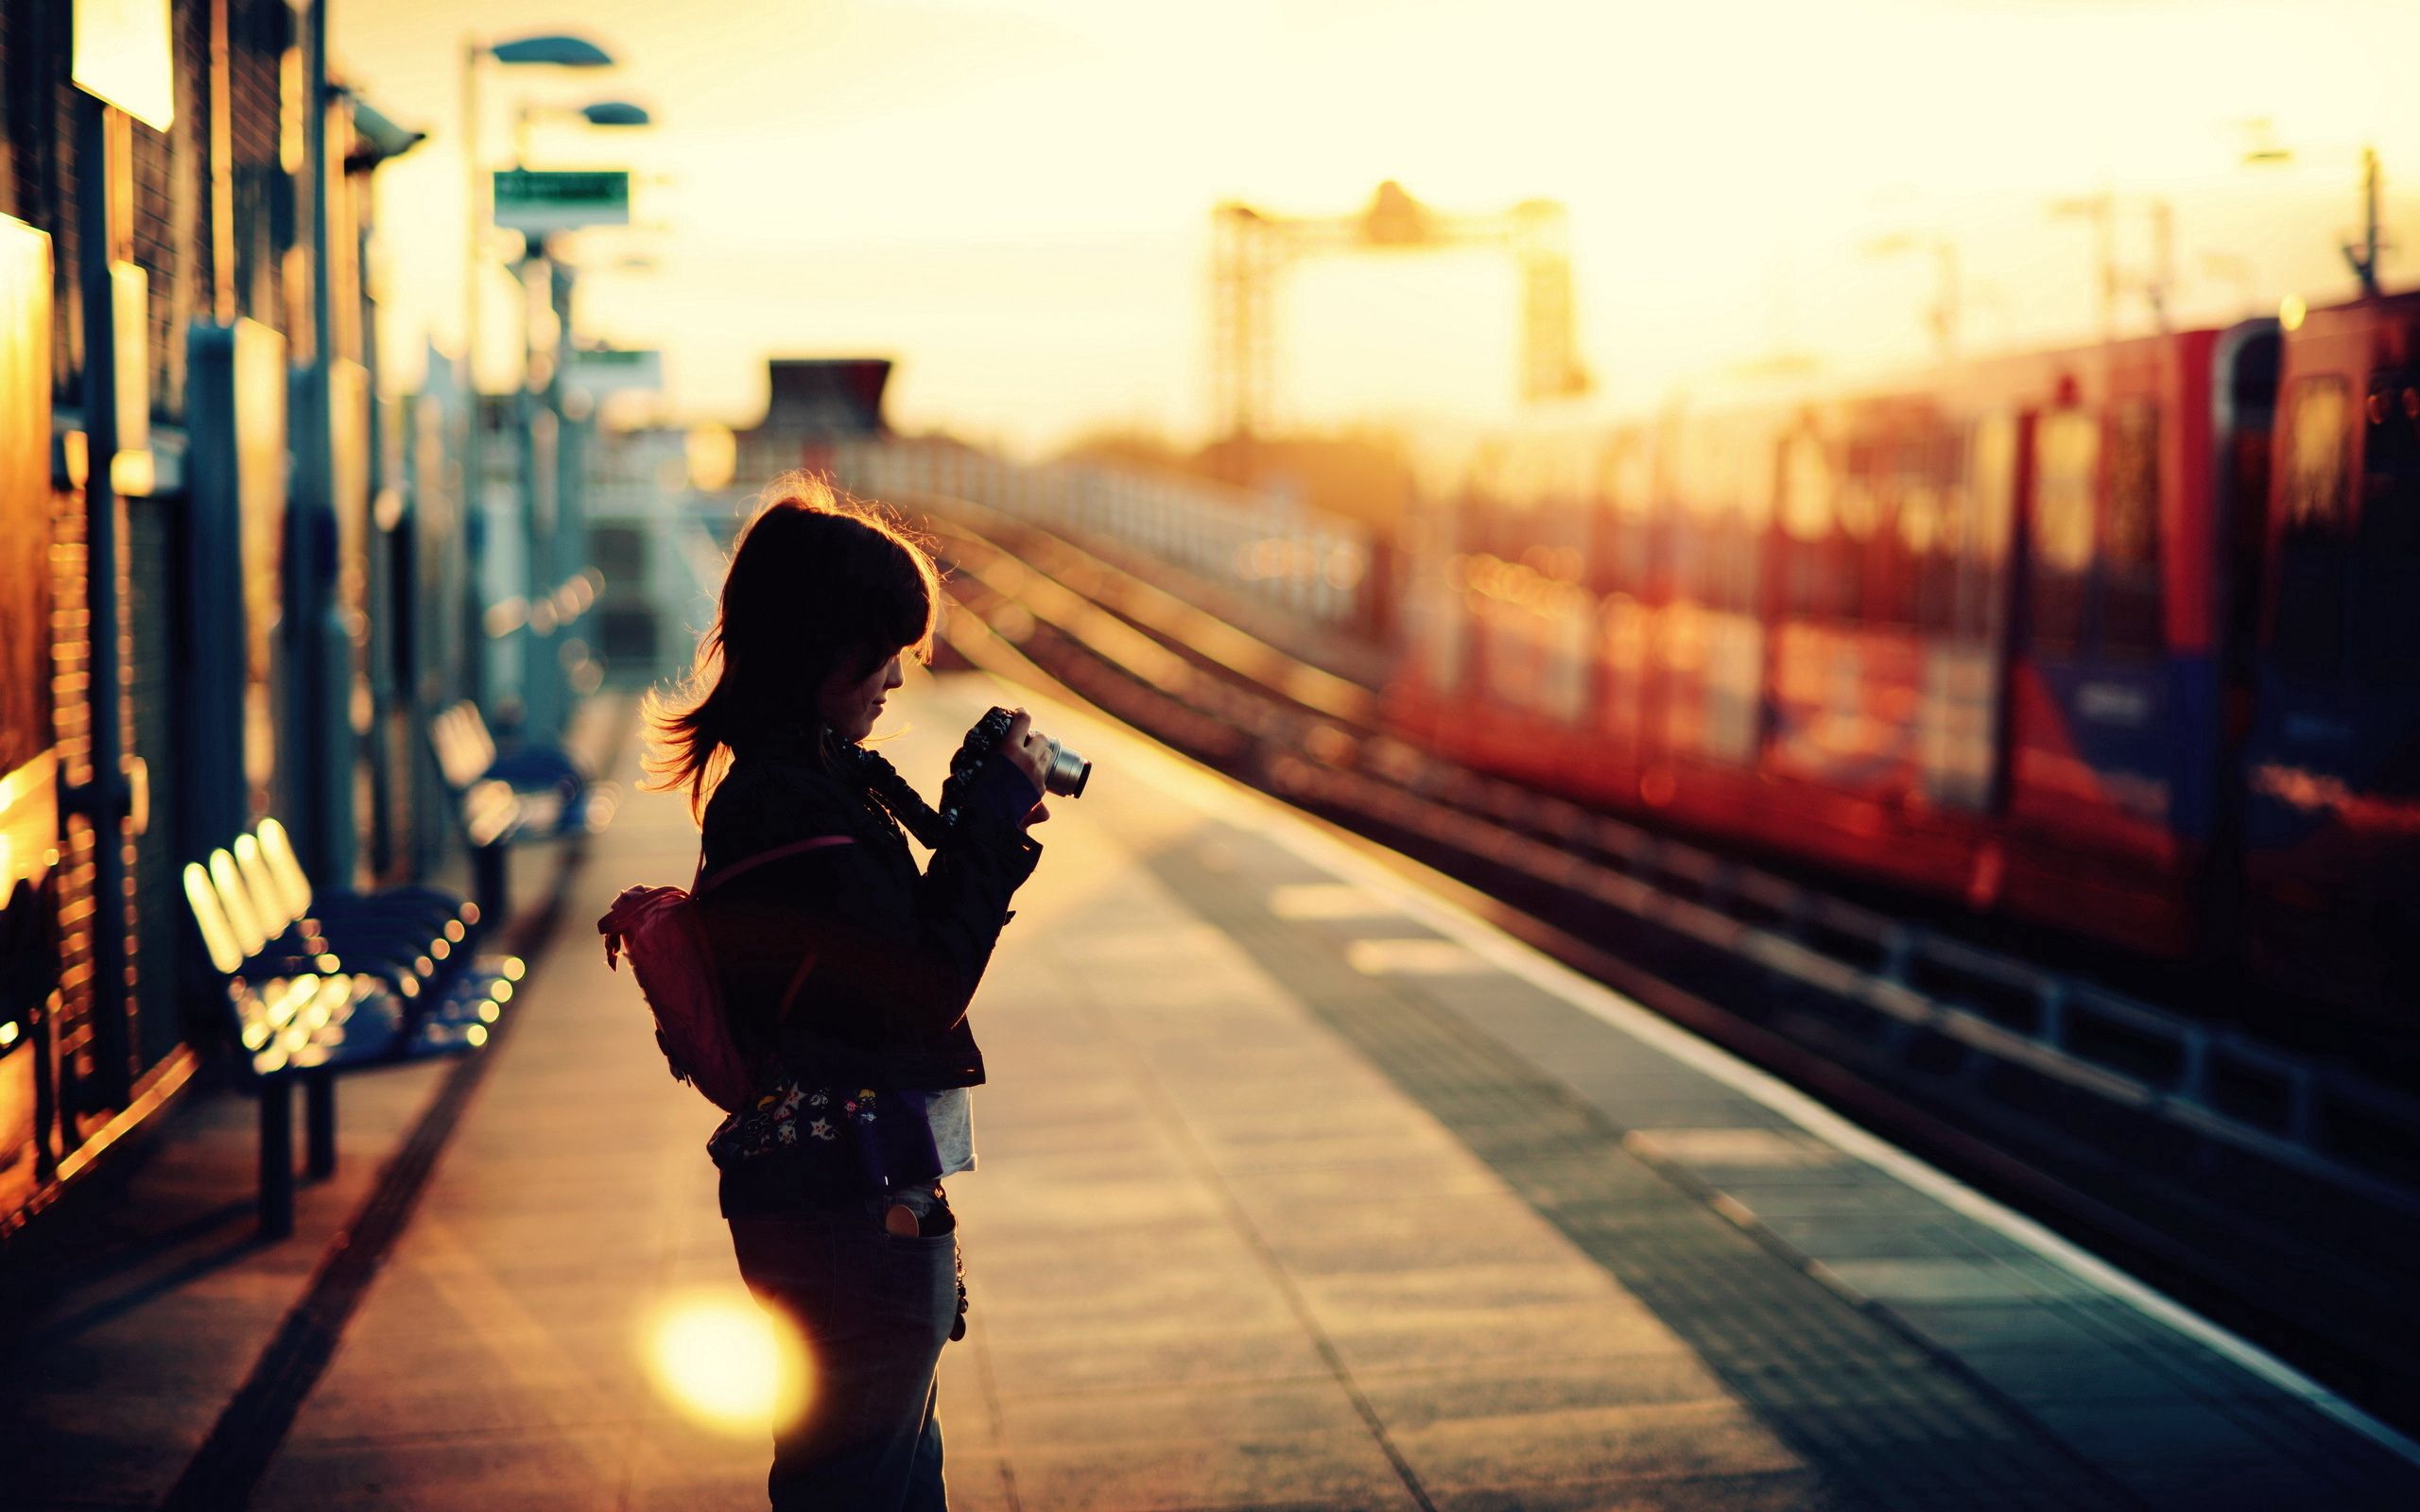 Download background station, miscellanea, miscellaneous, girl, mood, railway station